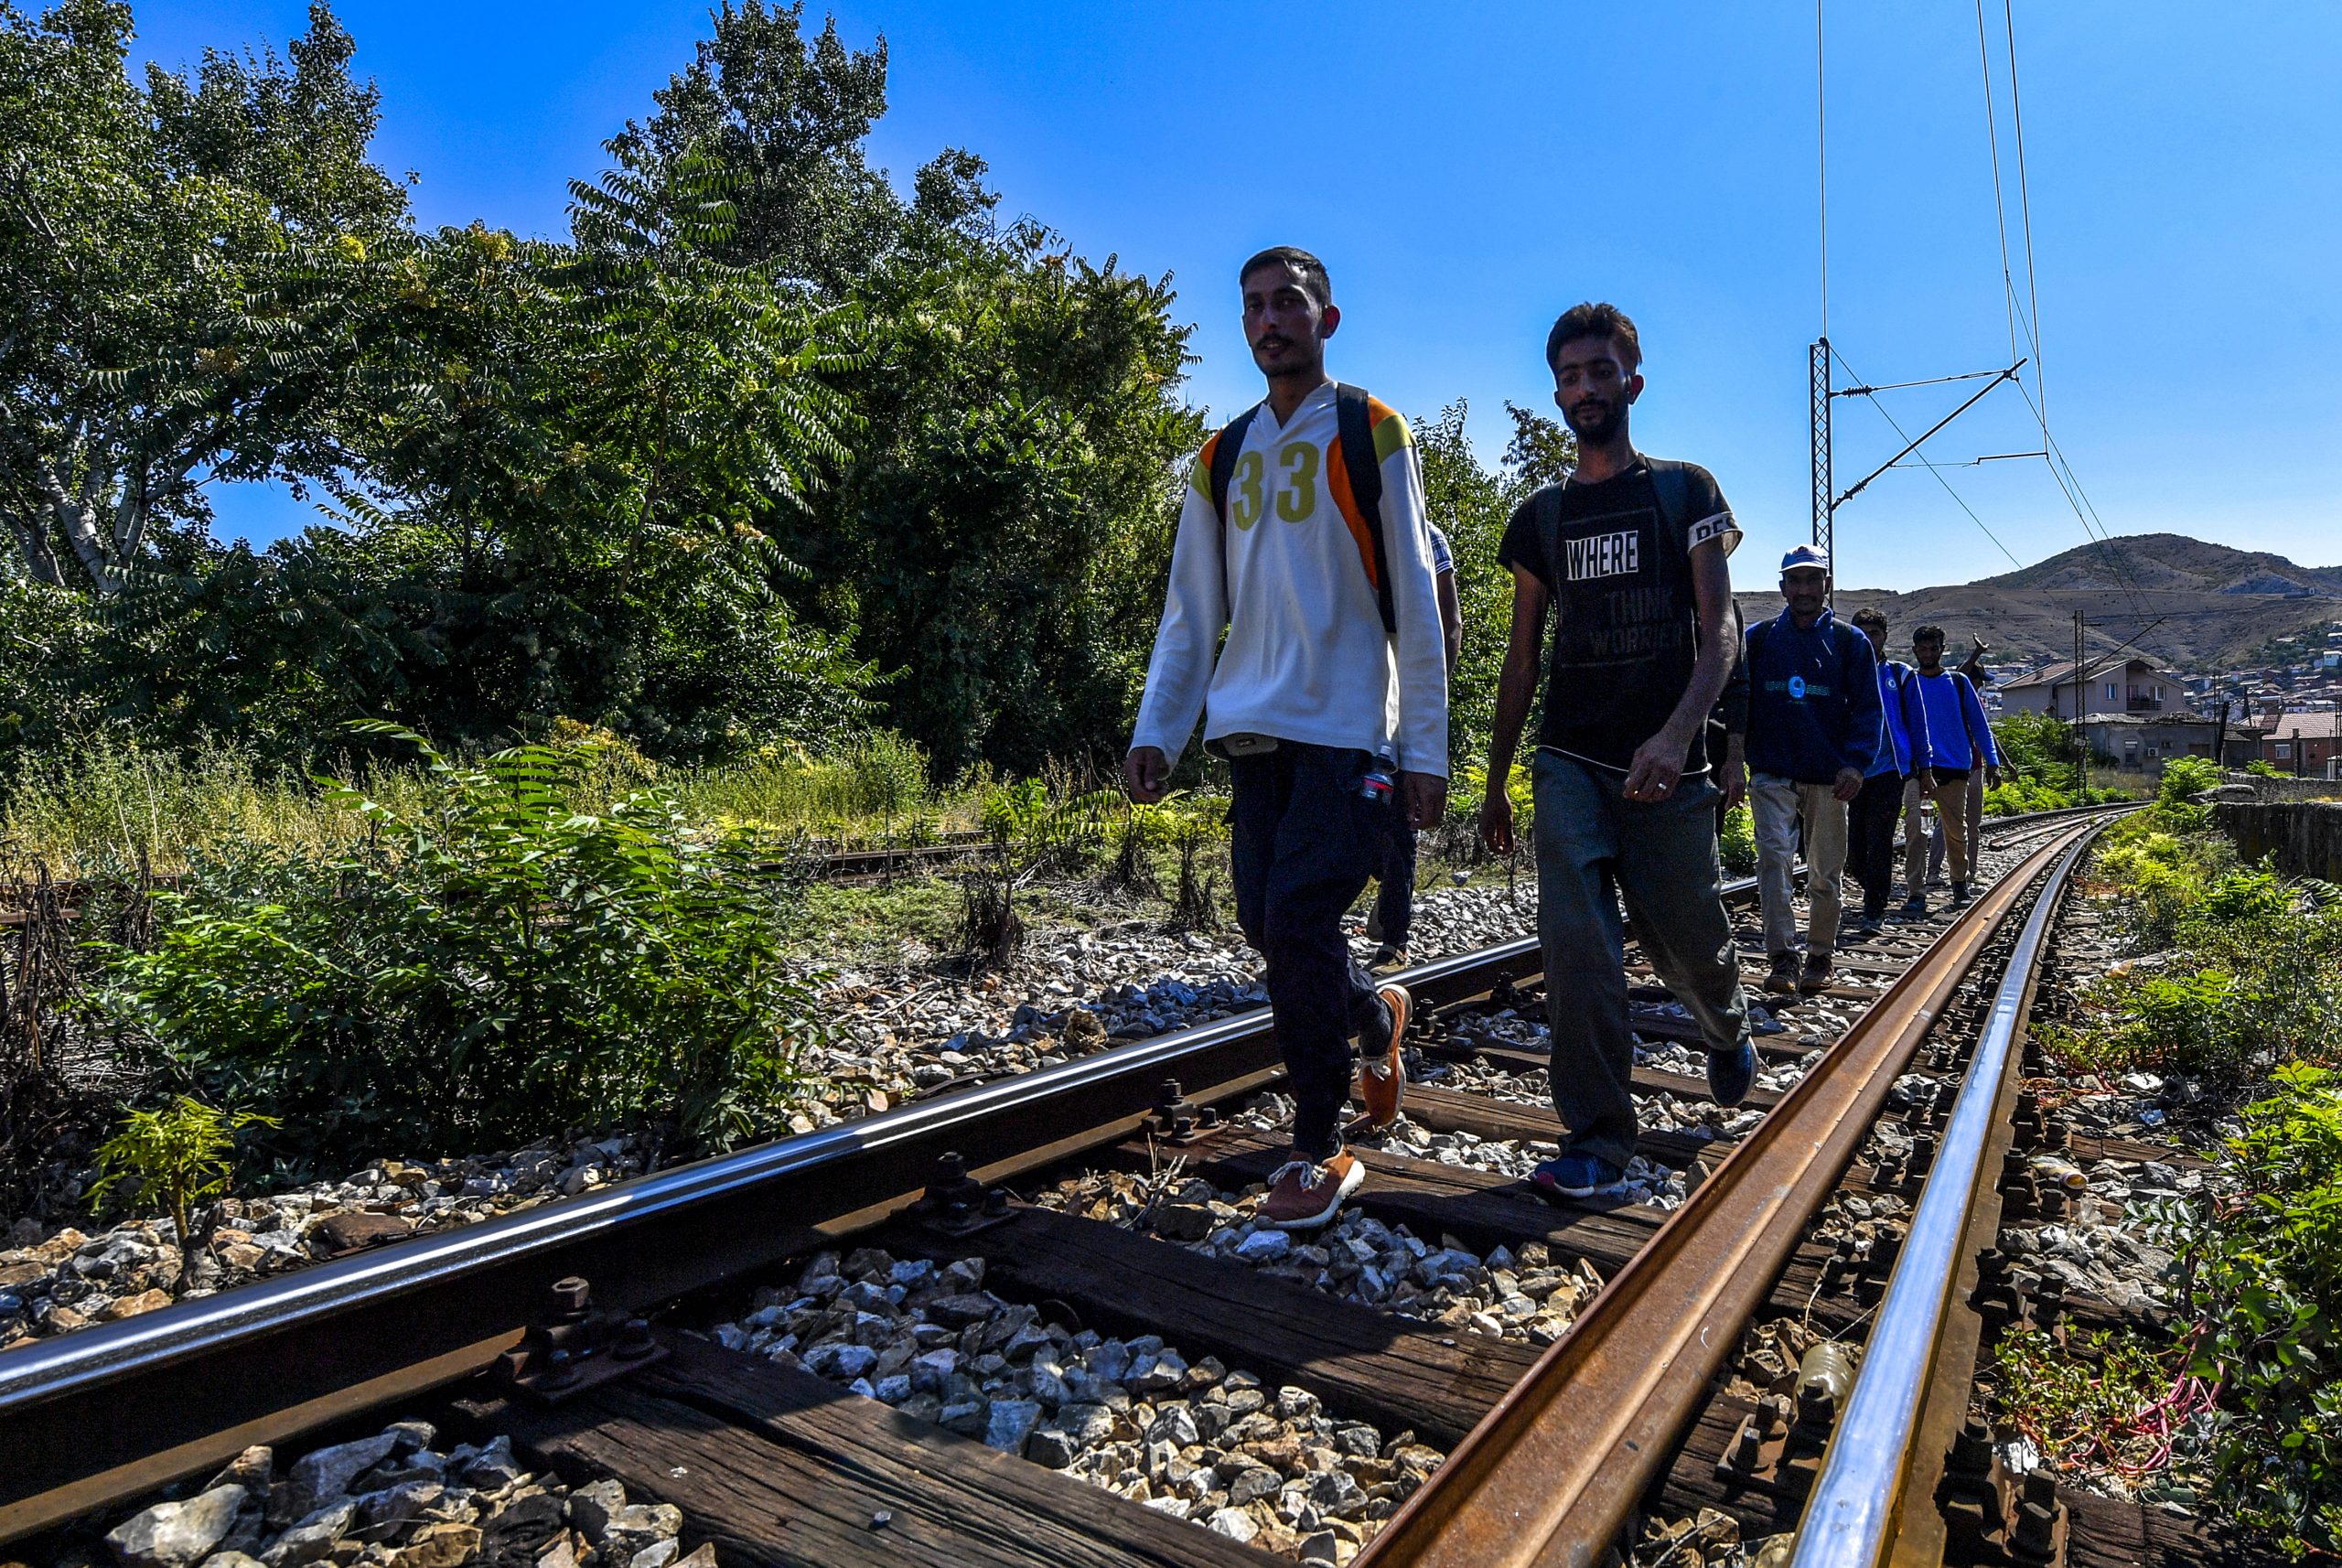 epa08046467 Undocumented migrants walk on the rail tracks during their journey towards western Europe, after resting at Lenche Zdravkin's house in Veles, Republic of North Macedonia on 14 August 2019 (issued on 05 December 2019). Lenche Zdravkin has welcomed thousands of refugees and migrants who have passed through North Macedonia on their route towards western Europe. At her home in Veles, located on a train line that the migrants use to guide their path, the travelers can find shelter, food and water, as well as a place to rest and recover before continuing their arduous journey. But perhaps most importantly, they find warmth and sympathy from a kind stranger. 'I see my children in all of the boys that come to my home,' Lenche says, who is also known by migrants as 'Mother Lenche', the 'Woman of the Railways'and 'Angel of the Refugees'.  EPA/GEORGI LICOVSKI  ATTENTION: This Image is part of a PHOTO SET